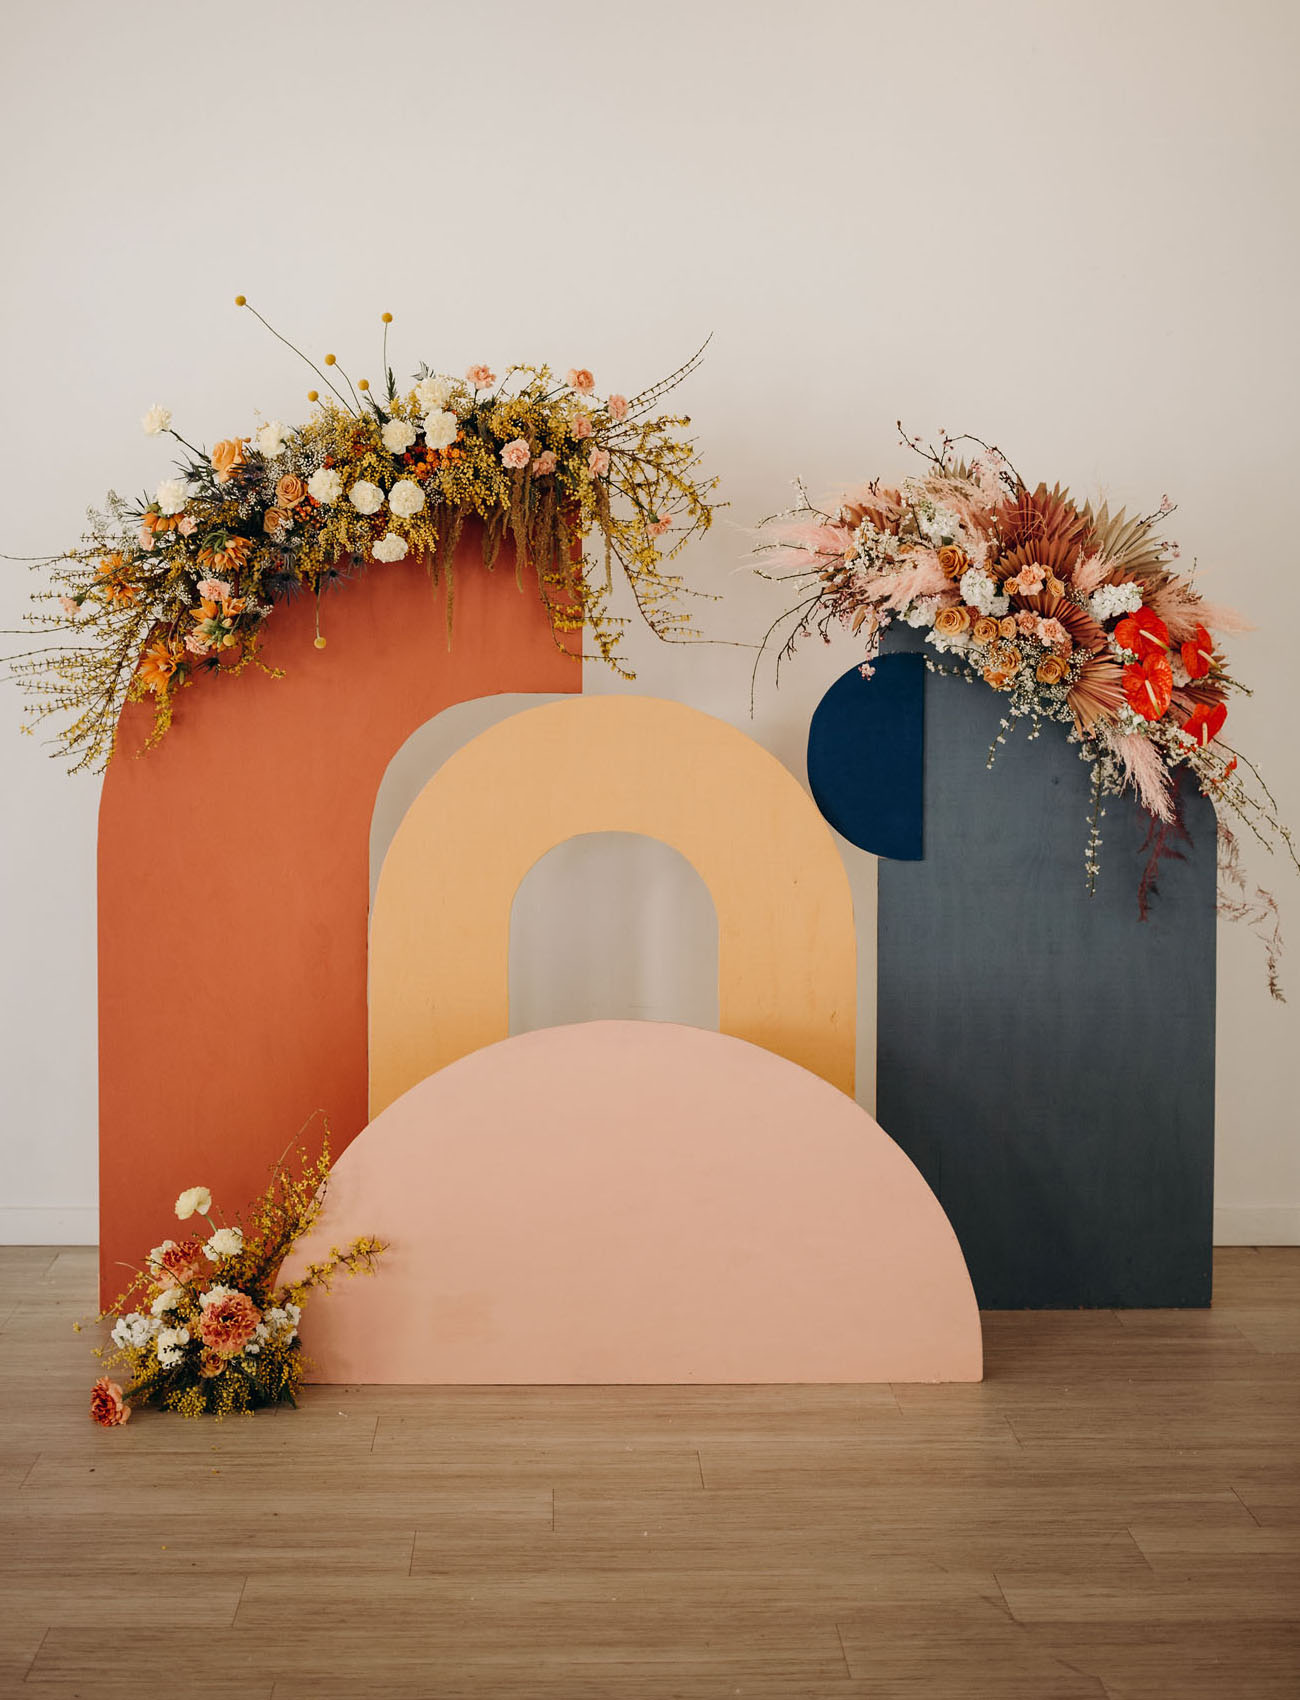 The wedding backdrop was a muted one, a cutout wooden backdrop with bright blooms and greenery